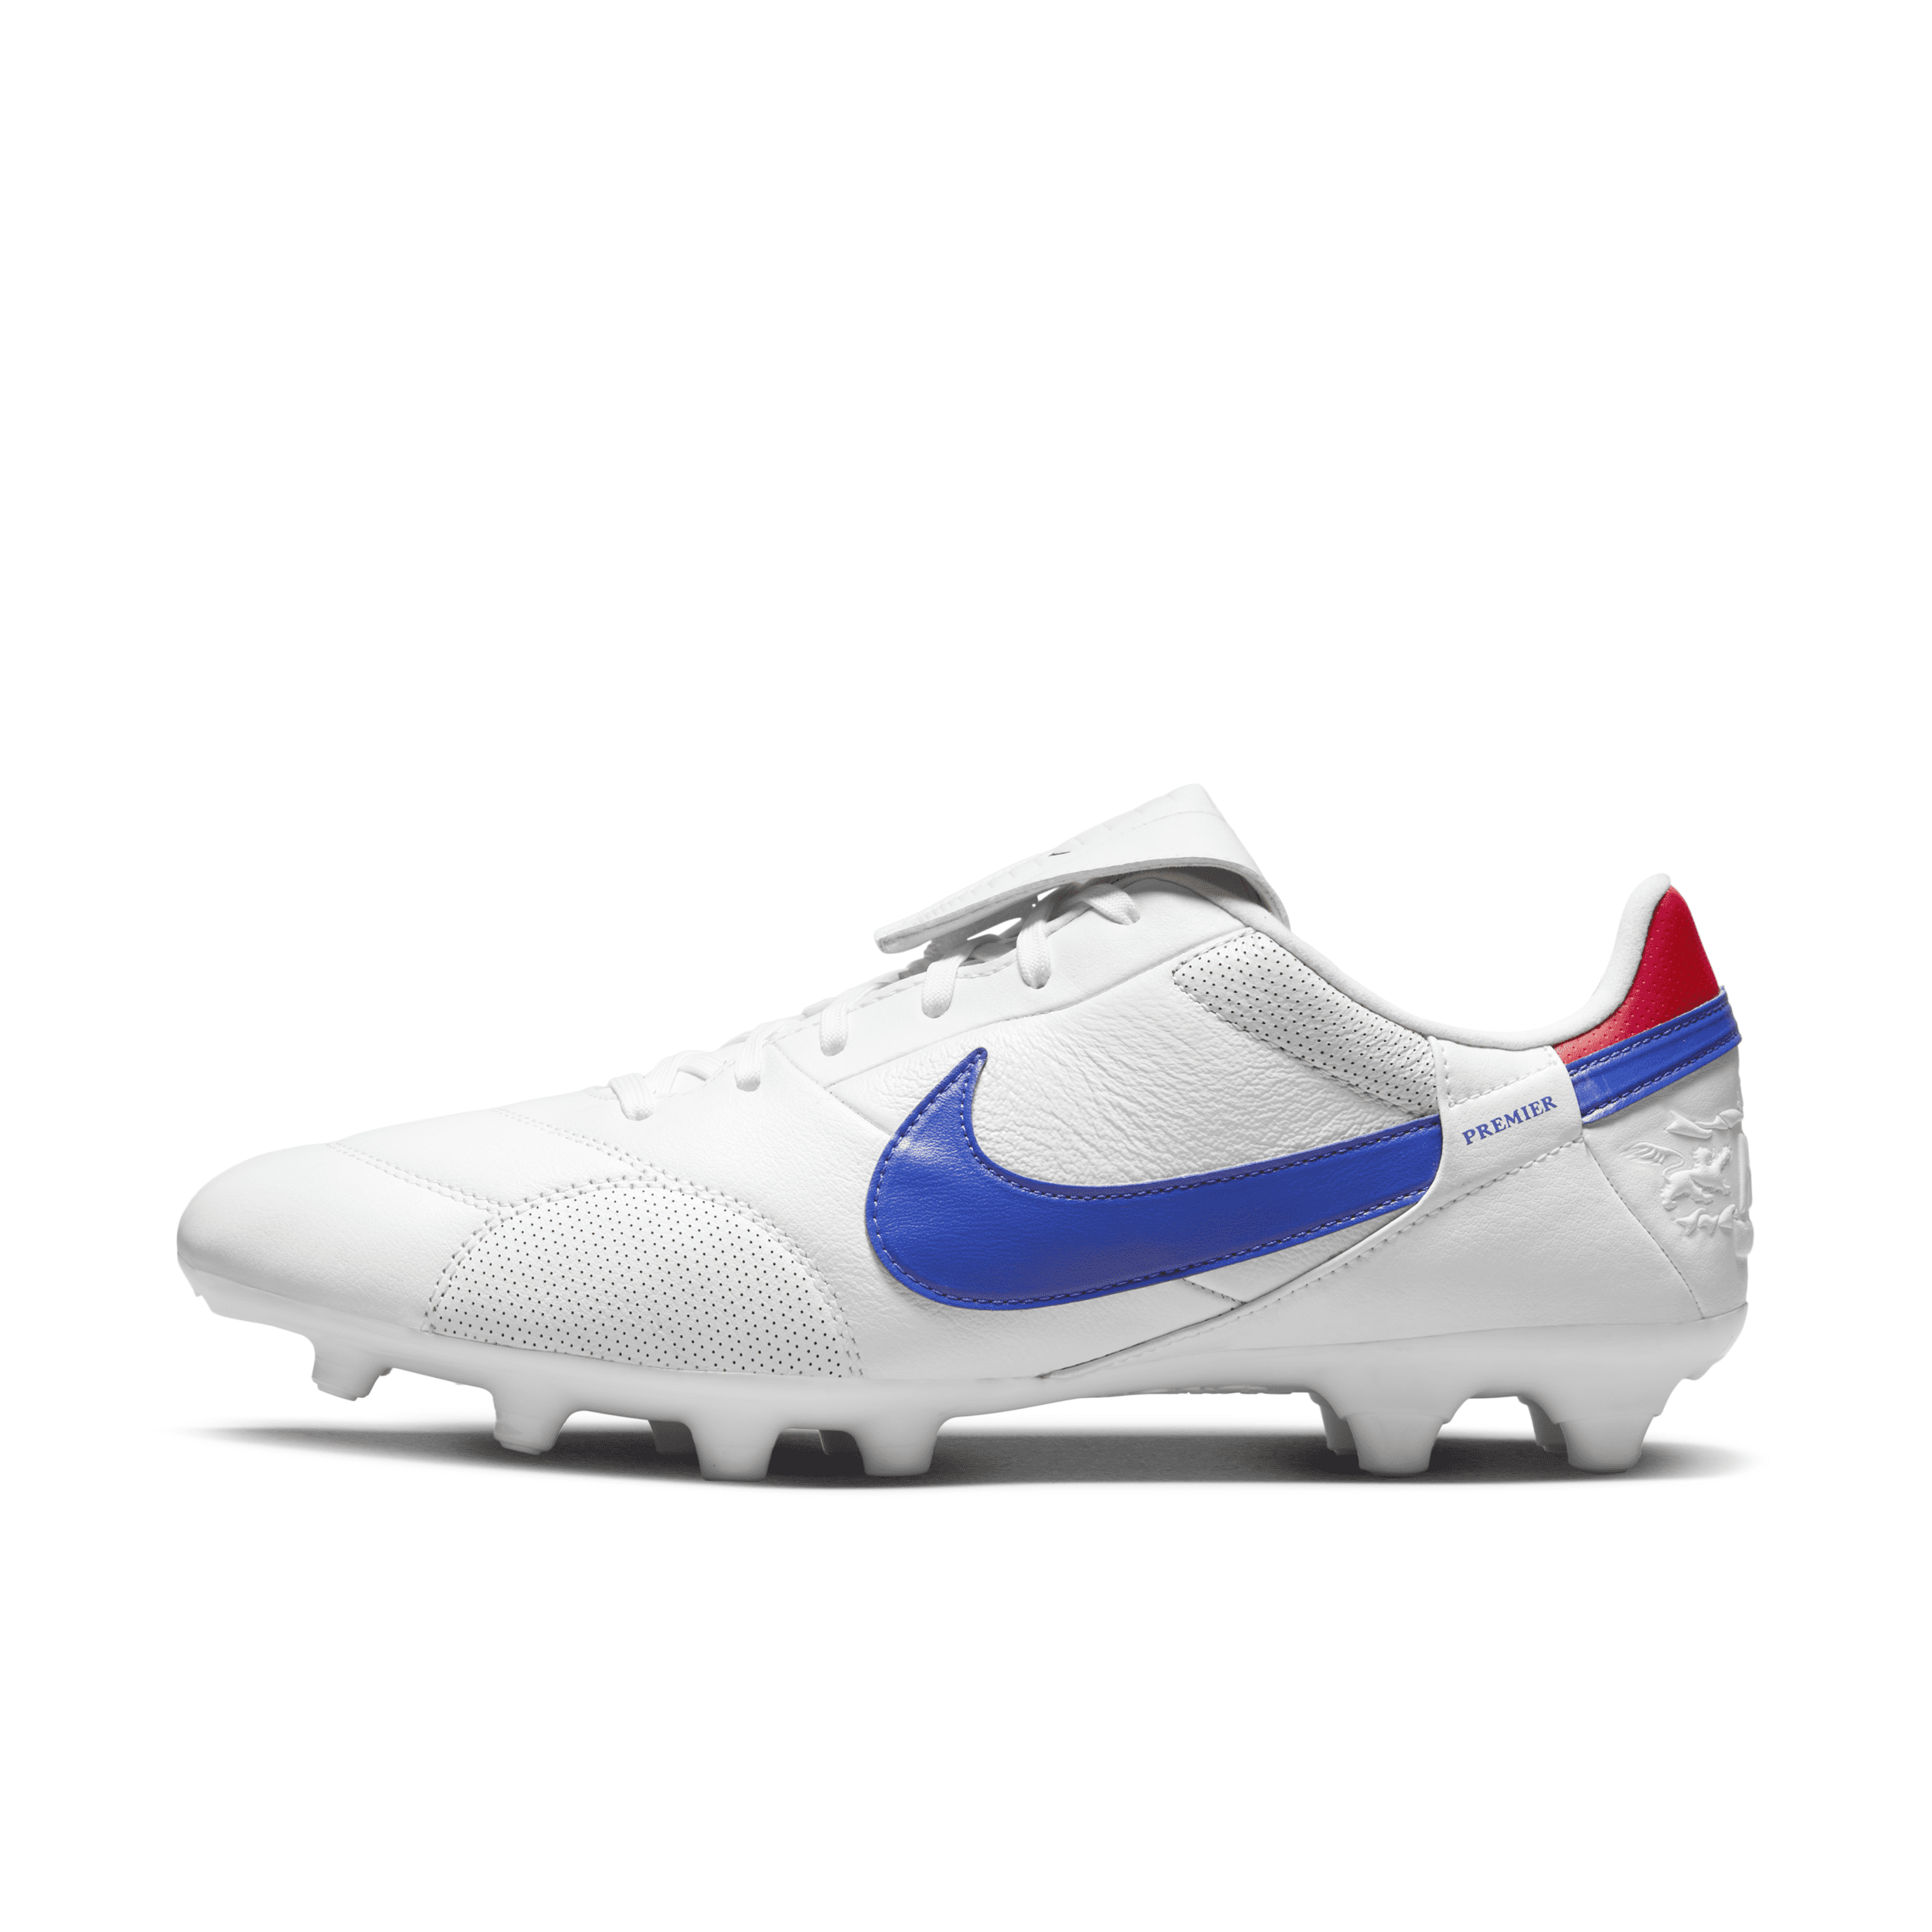 Nike Men'spremier 3 Firm-ground Soccer Cleats In White